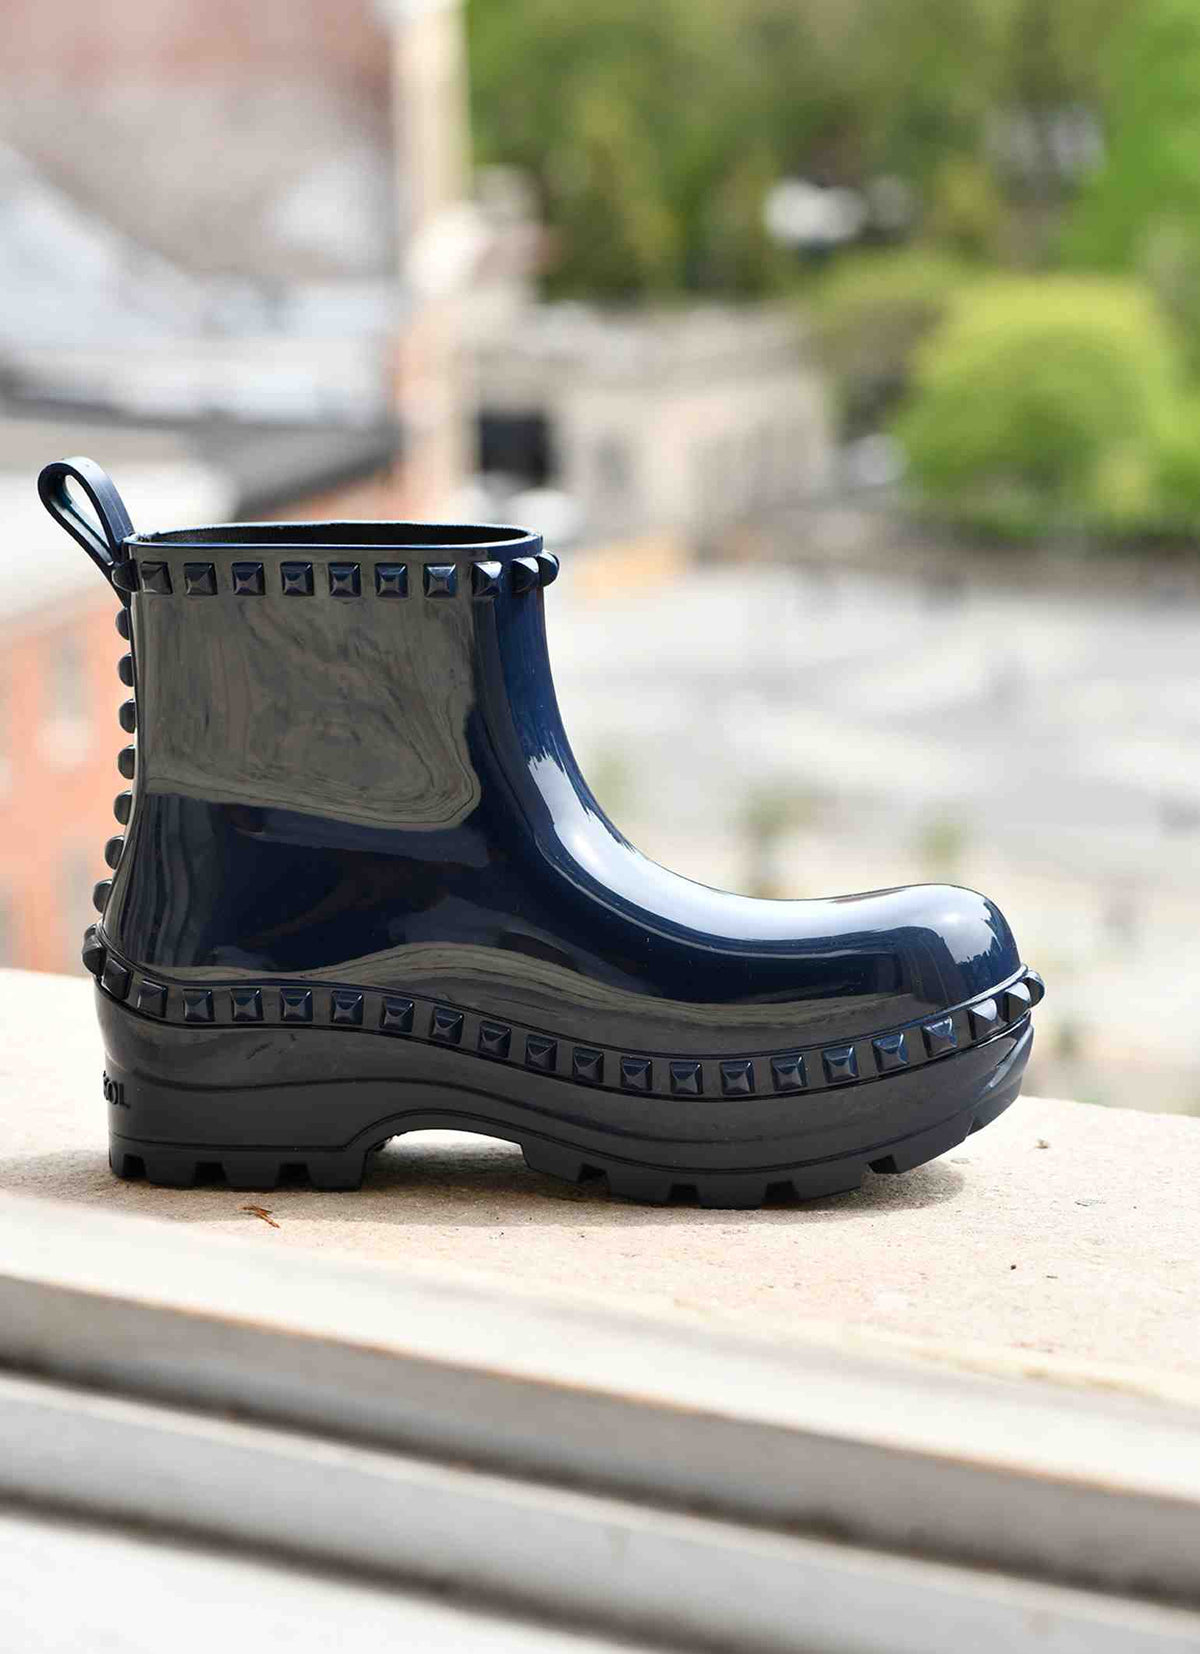 Studded Graziano boots for women in color navy blue